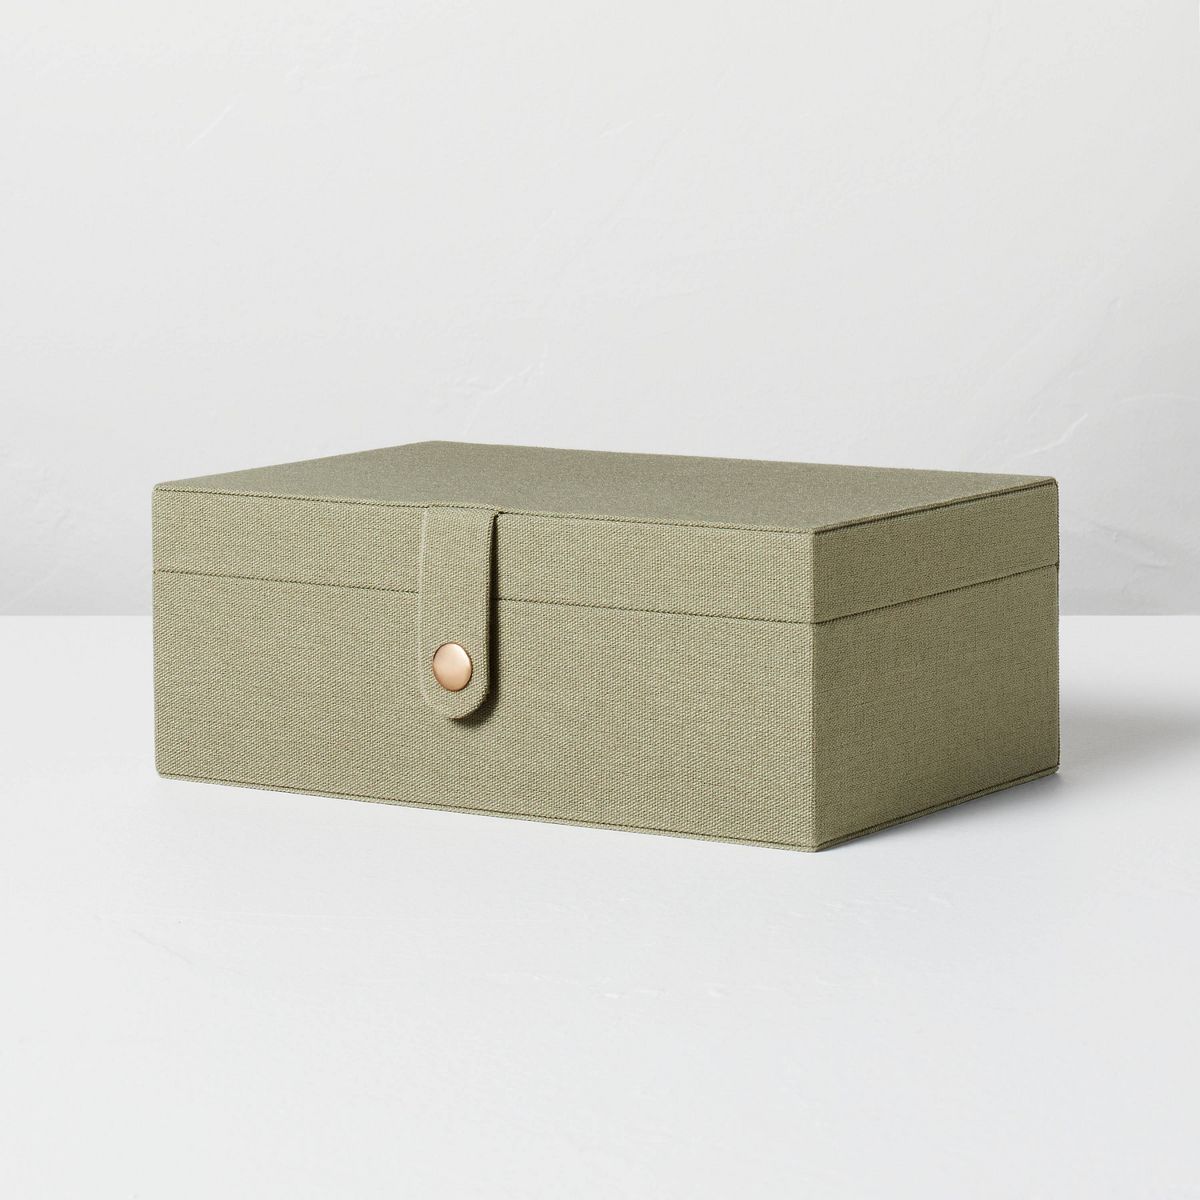 Small Fabric Storage Box Light Green - Hearth & Hand™ with Magnolia | Target